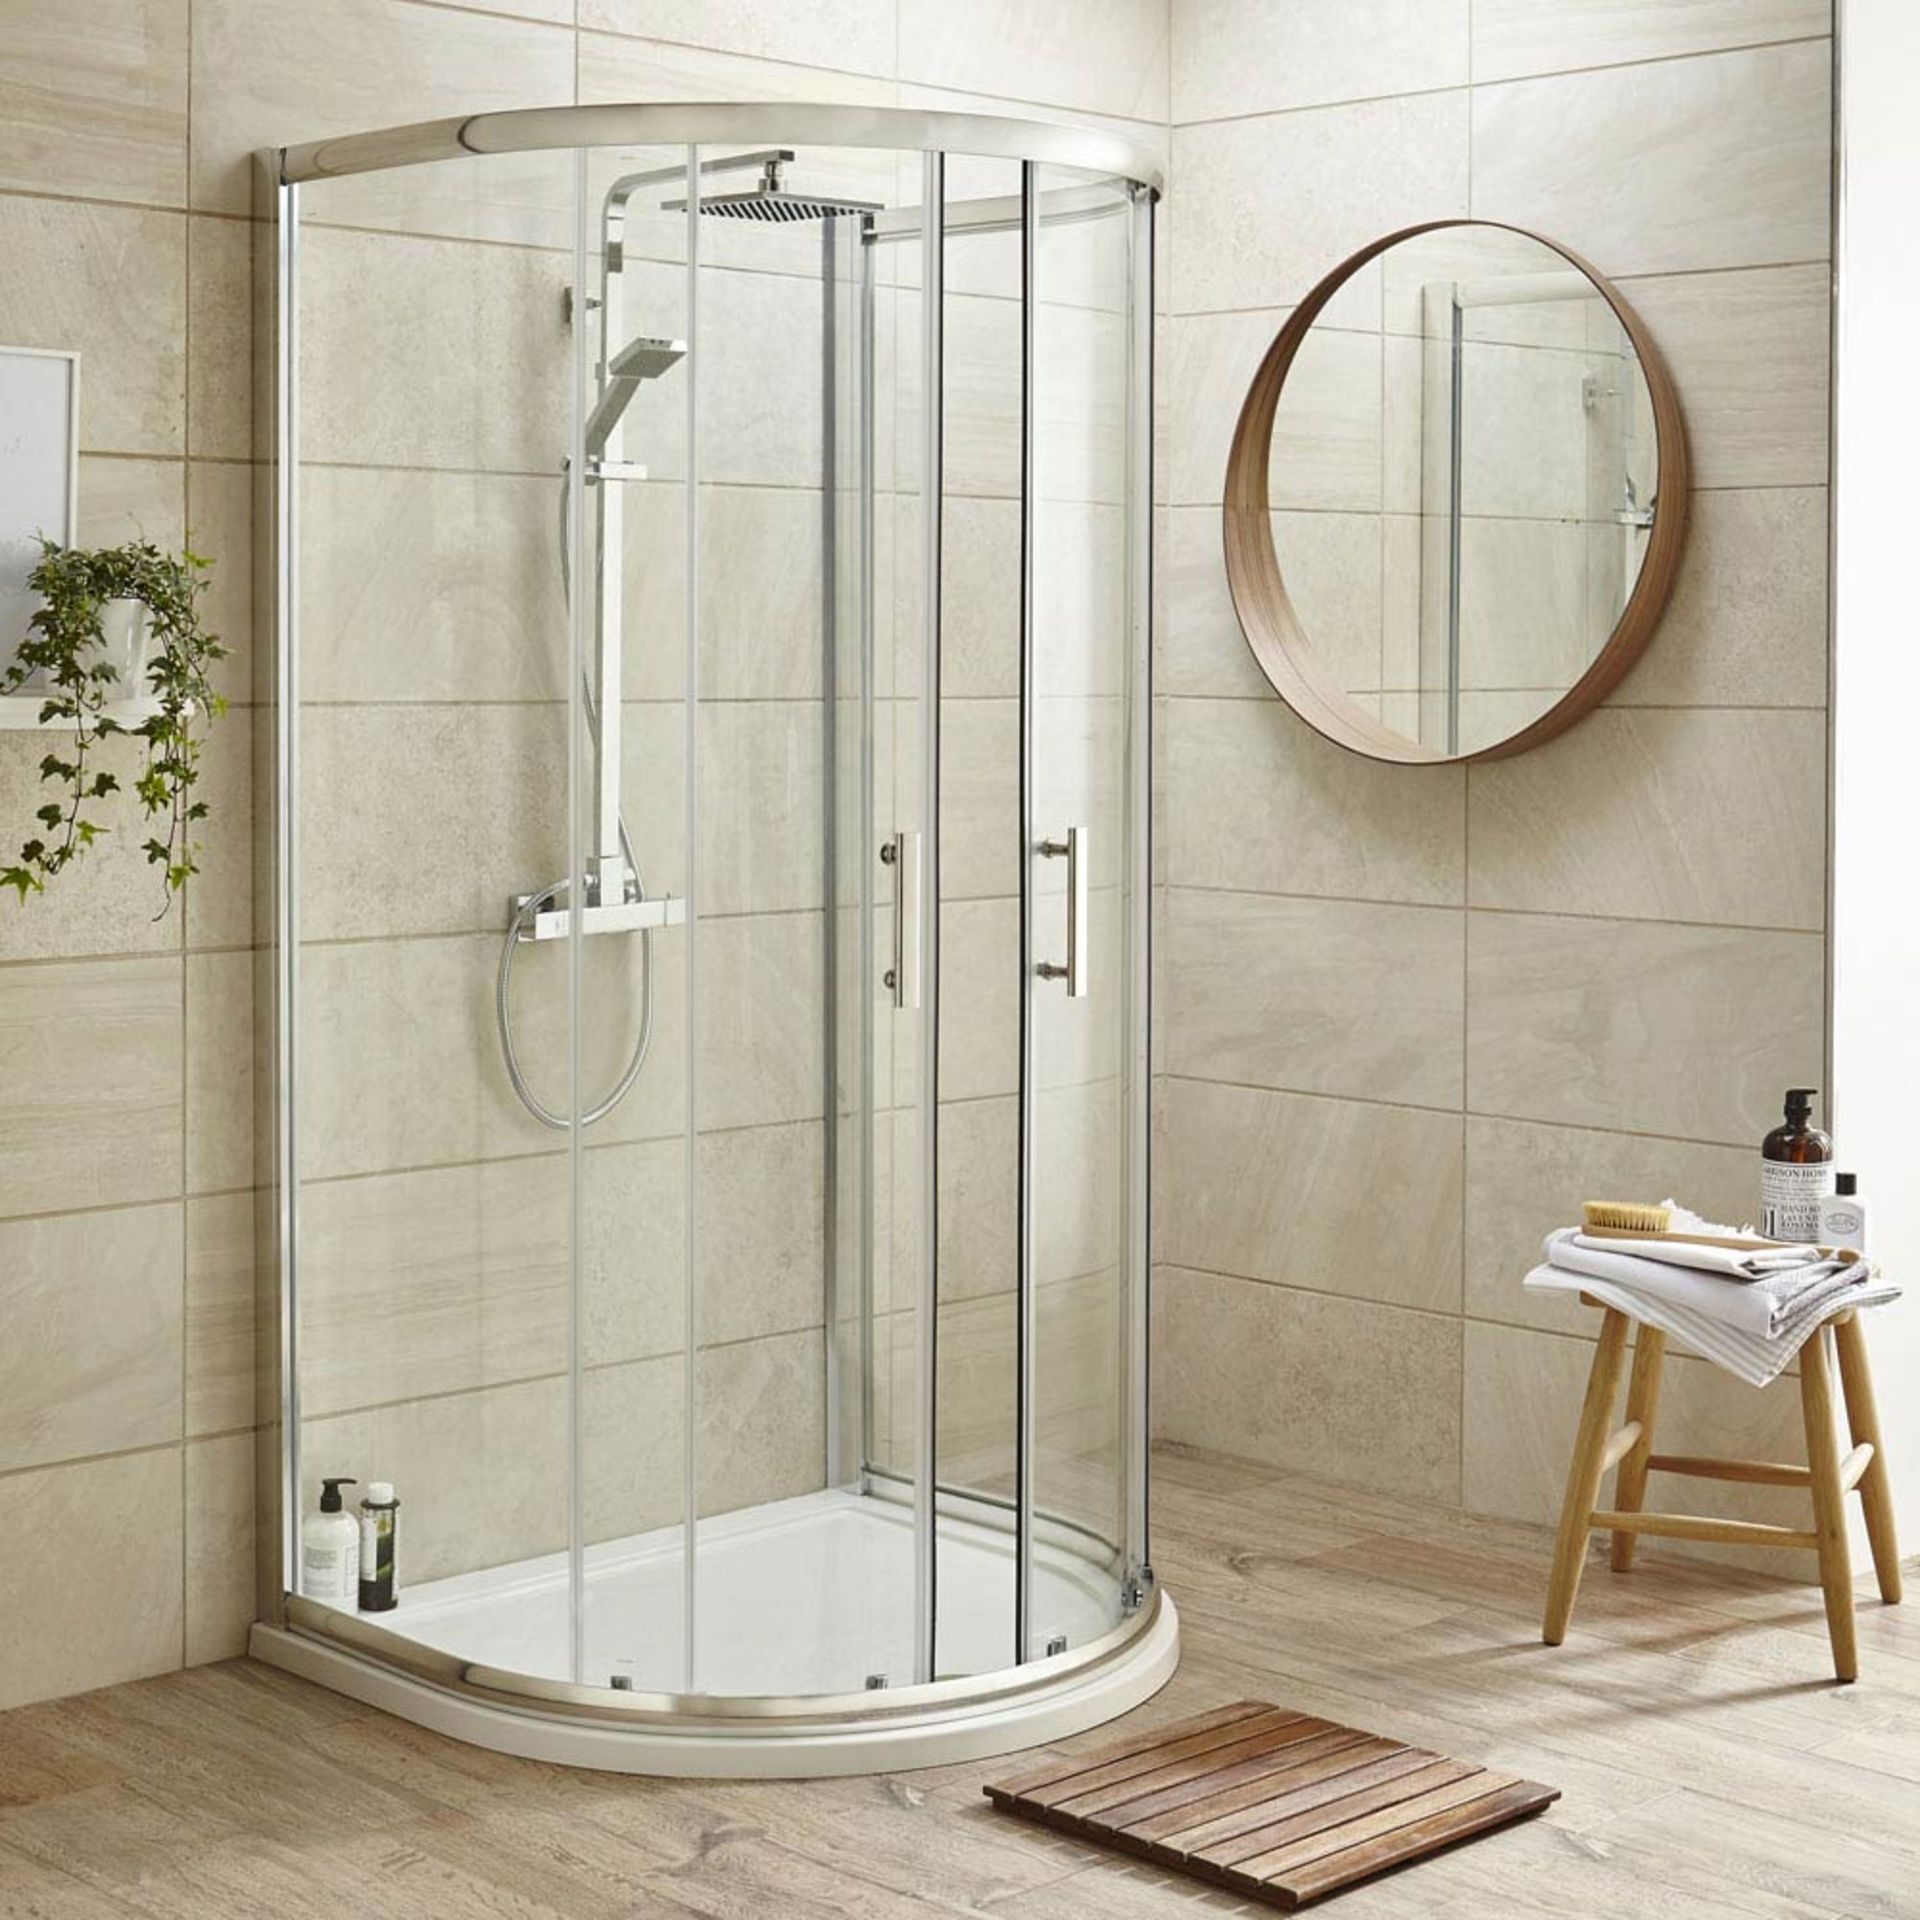 NEW (PC129) Twyfords 770mm Hydro D Shape White Shower tray.Low profile ultra slim design Gel co... - Image 3 of 3